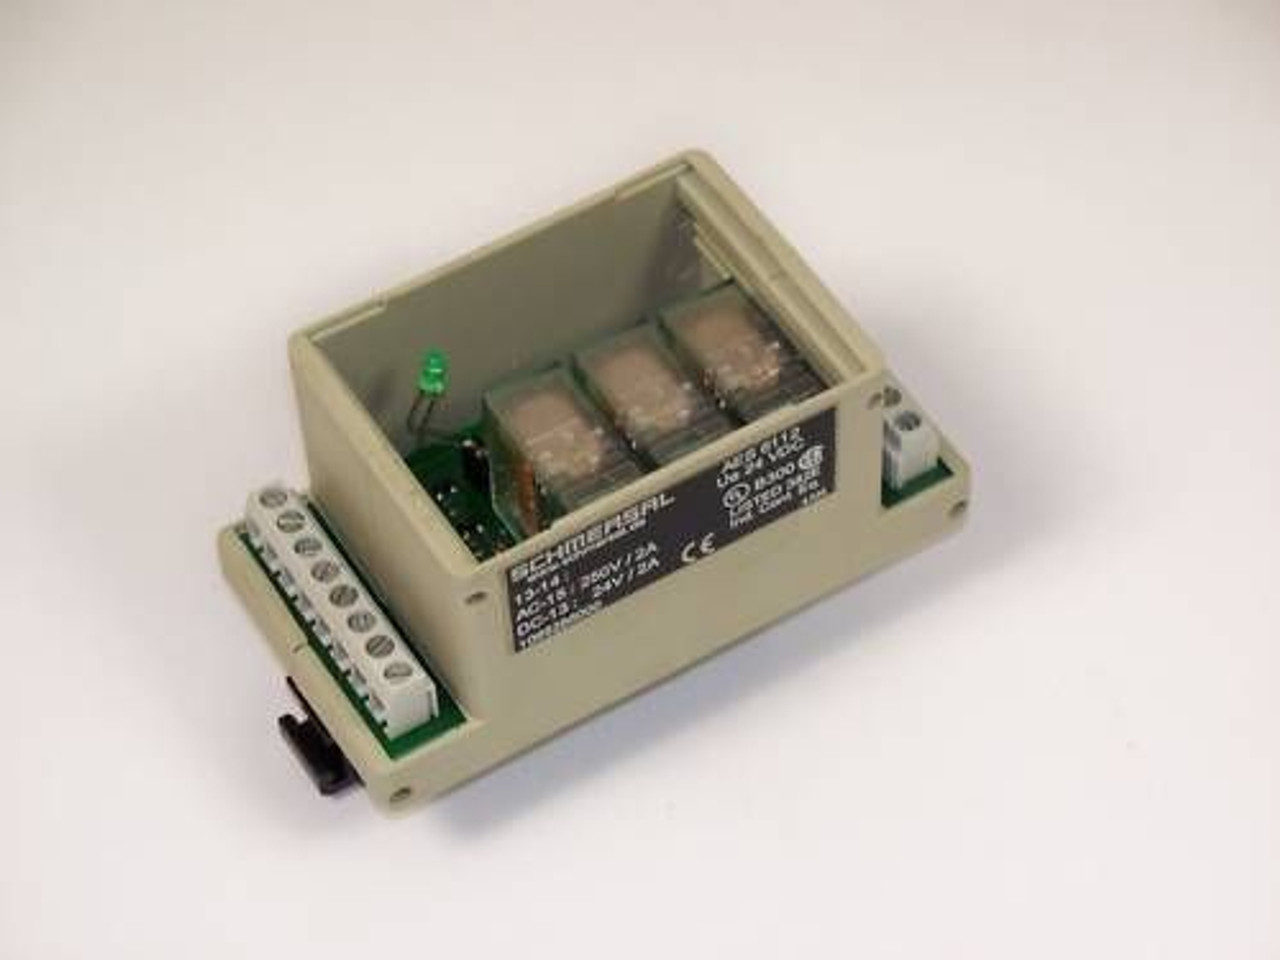 SCHMEASAL AES 6112 Safety Monitoring Module USED